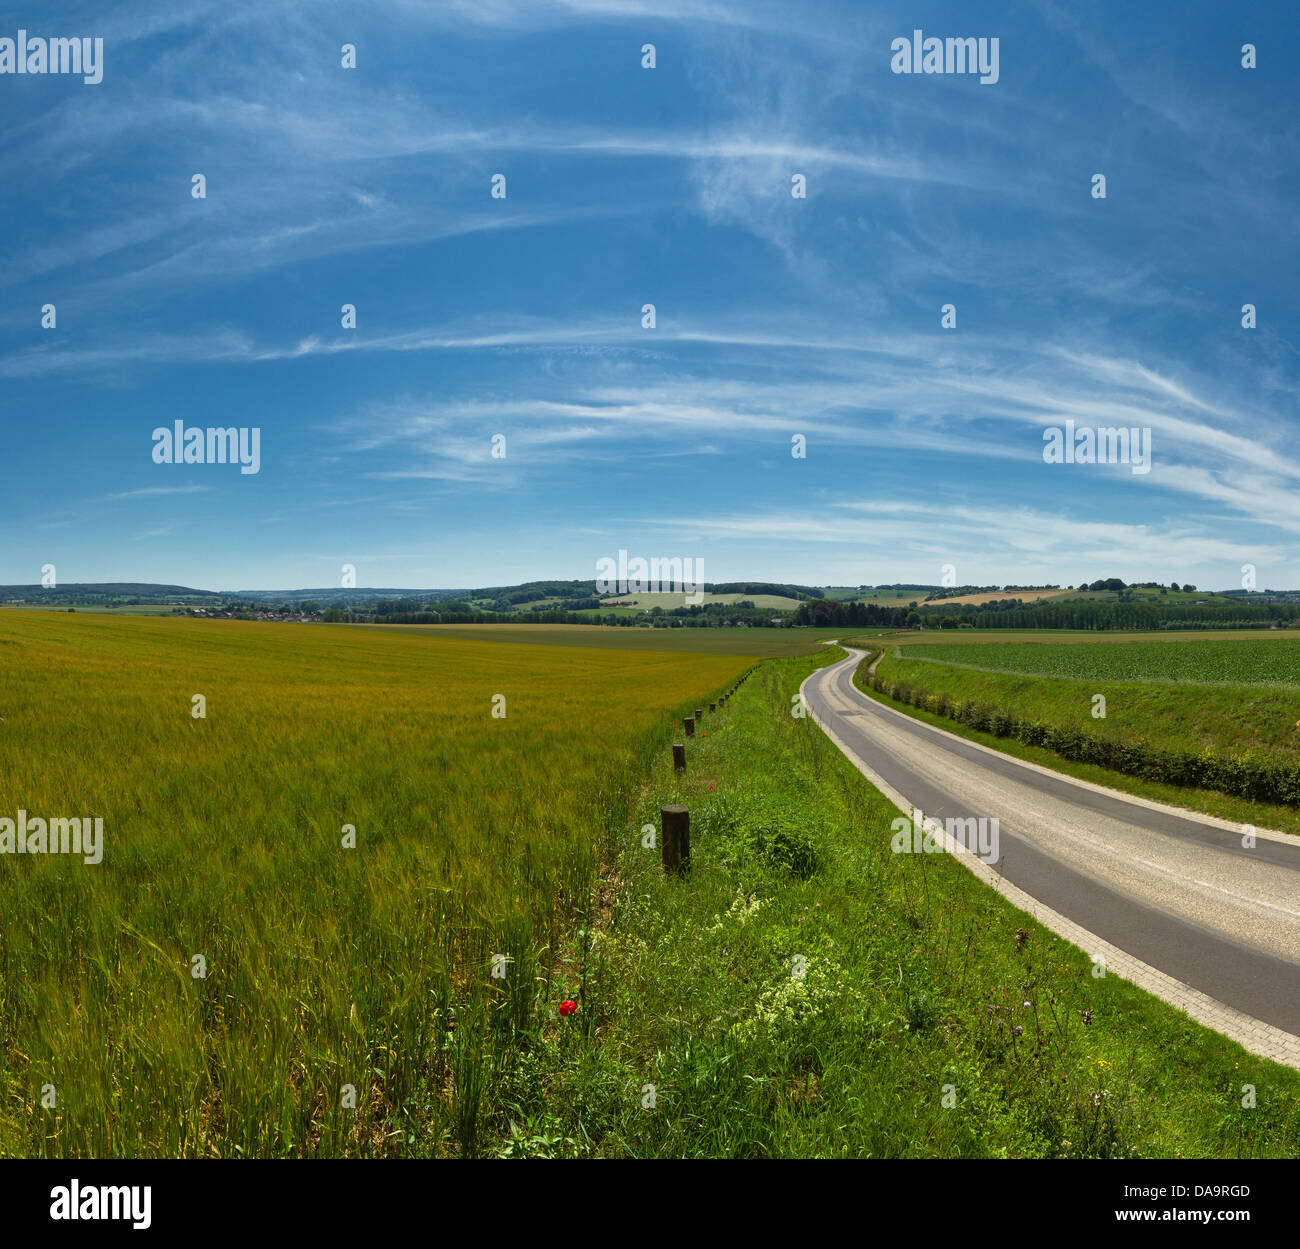 Netherlands, Holland, Europe, Gulpen, Hilly, Hill, country, landscape, field, meadow, summer, road, hills, Stock Photo